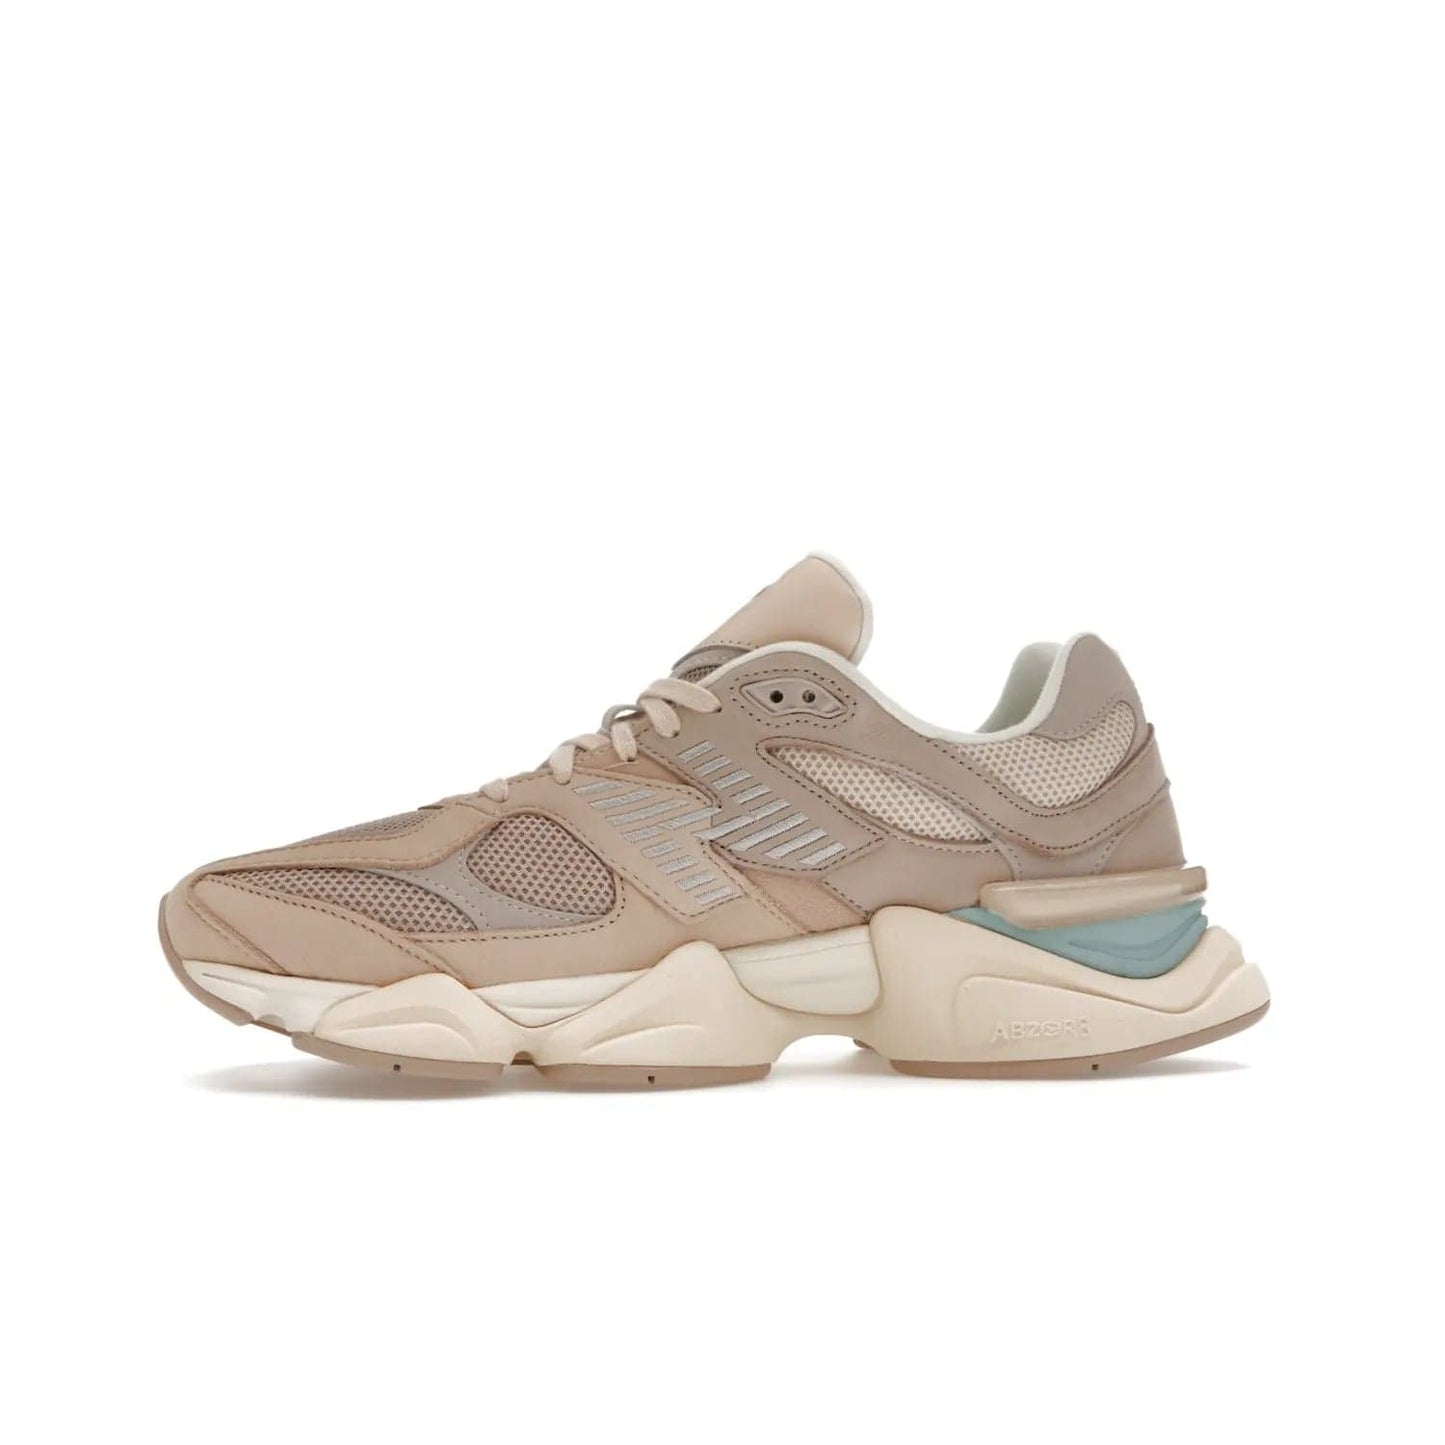 New Balance 9060 Ivory Cream Pink Sand - Image 18 - Only at www.BallersClubKickz.com - New Balance 9060 Ivory Cream Pink Sand - Sleek meshed upper, premium suede overlays, ABZORB cushioning. Get this unique sneaker ahead of the trend, launching December 6th, 2022!